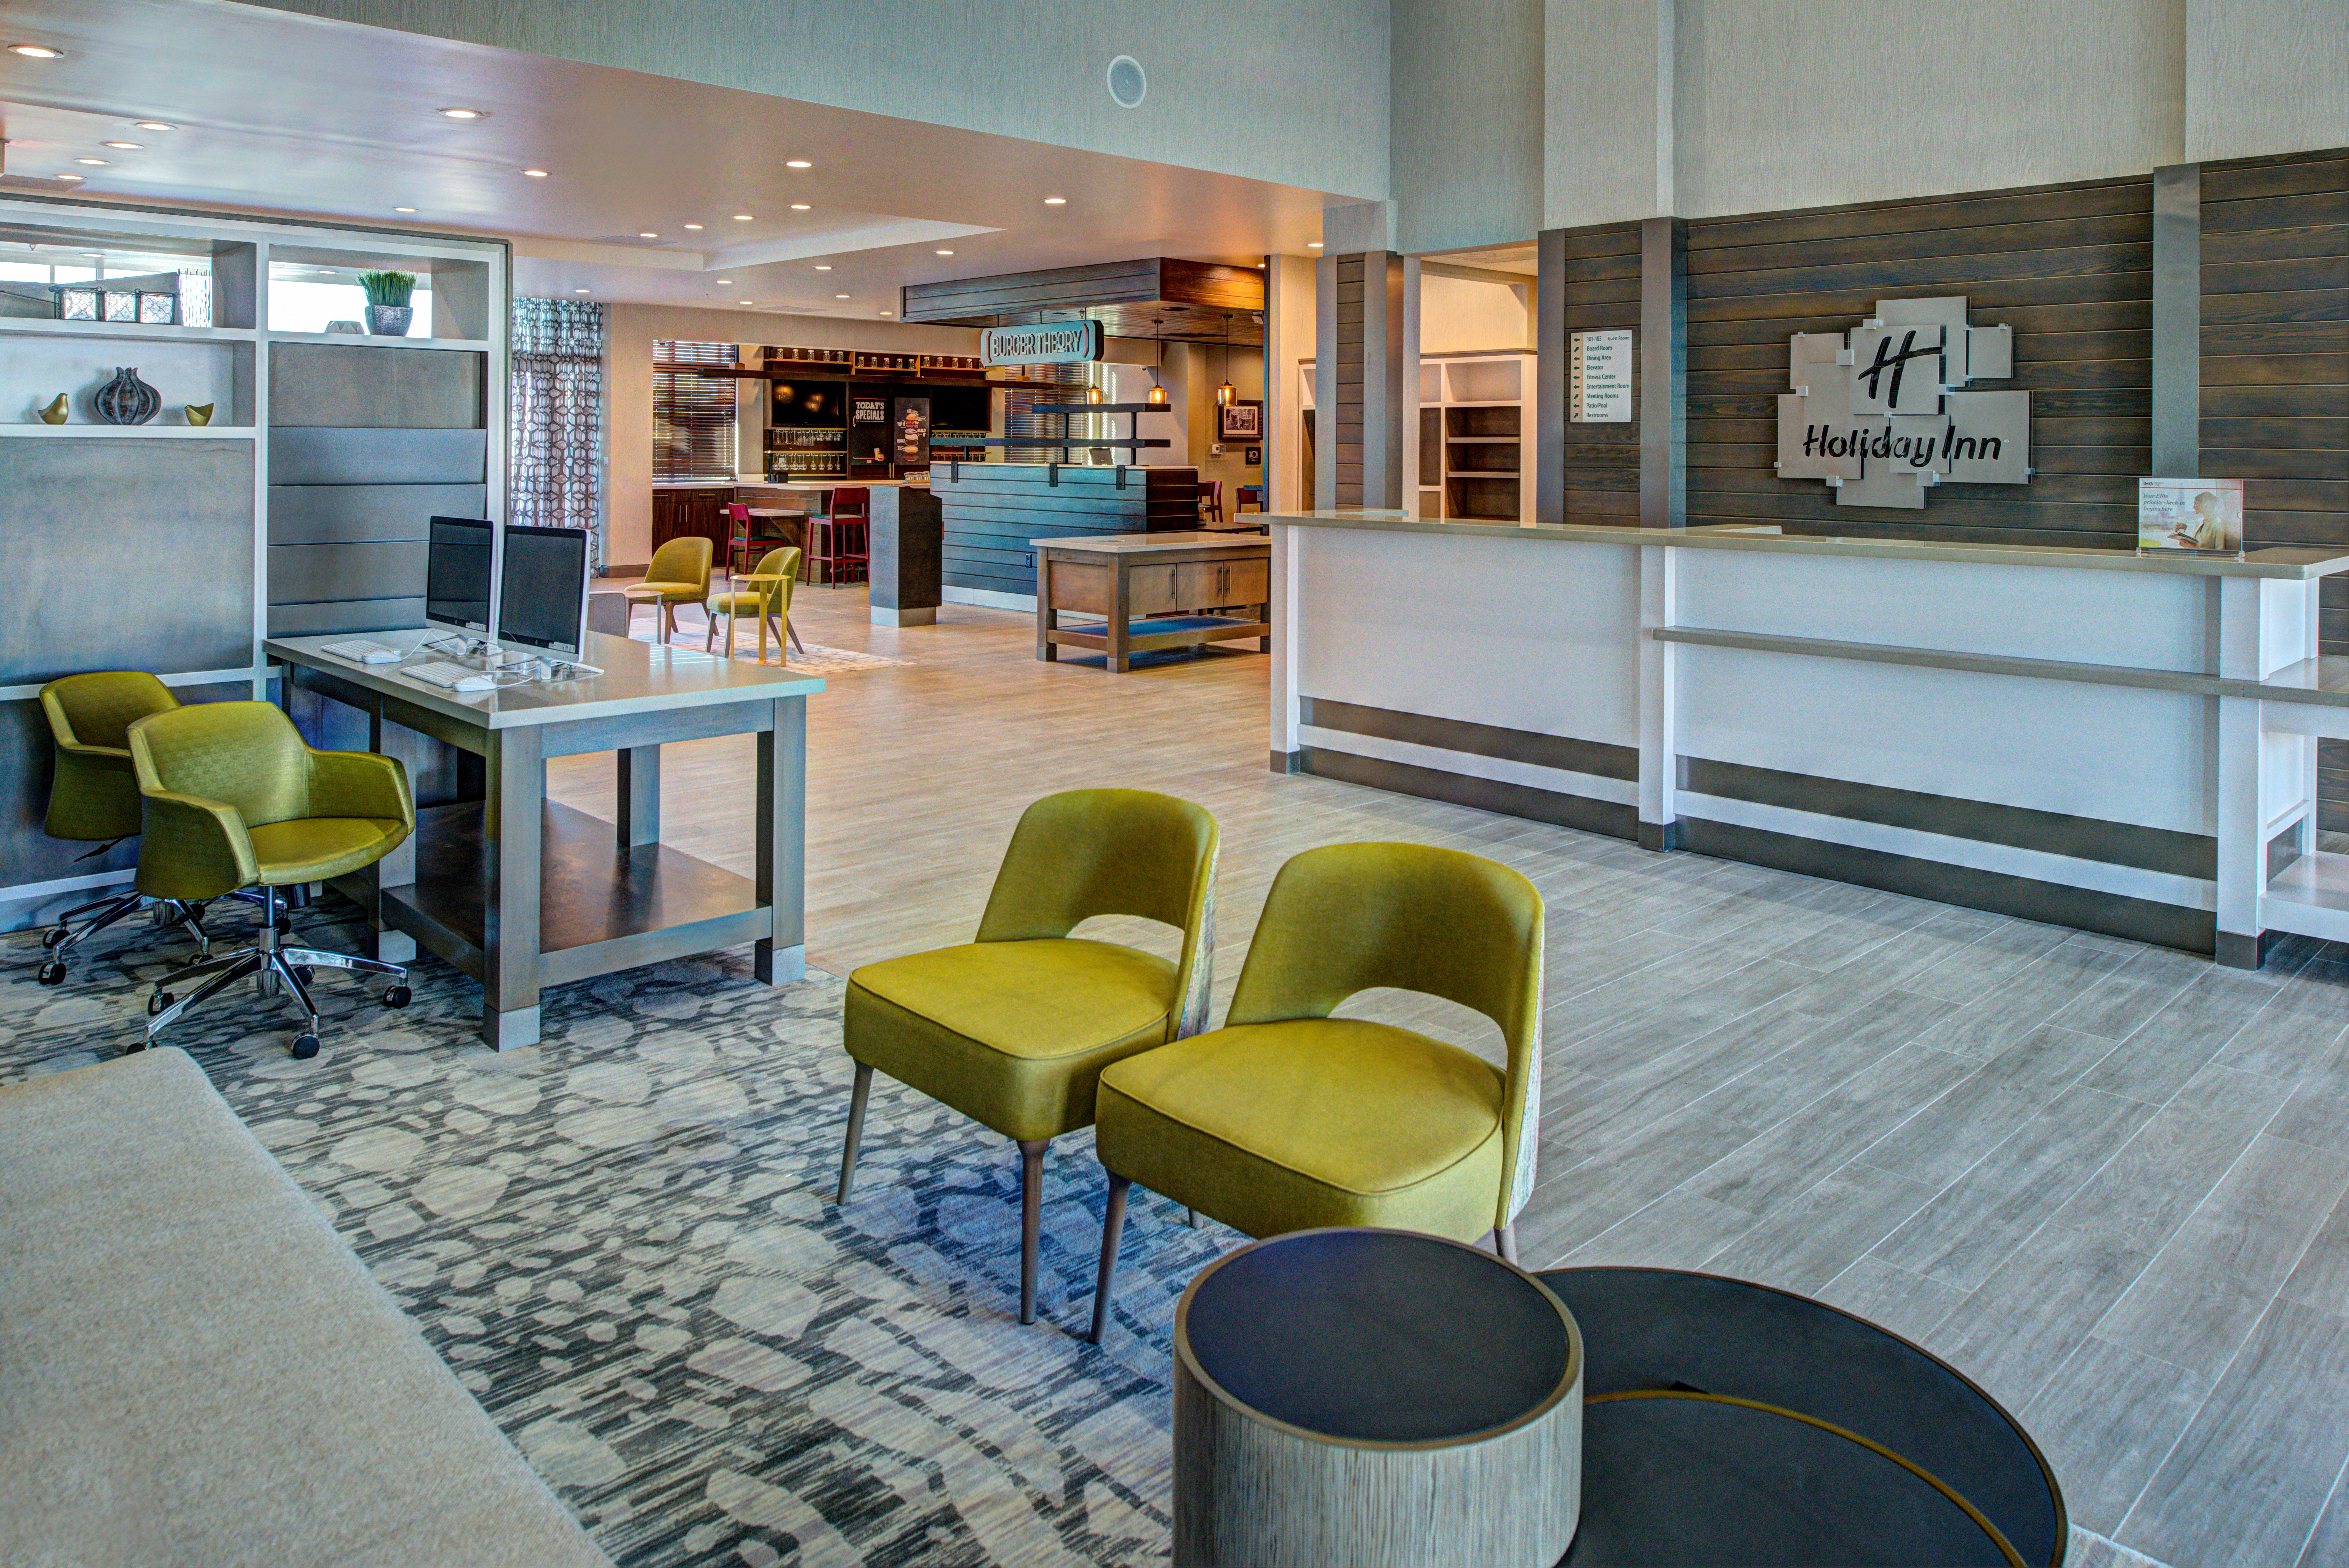 Enjoy free Wi-Fi in our lobby as you check-in for your stay.